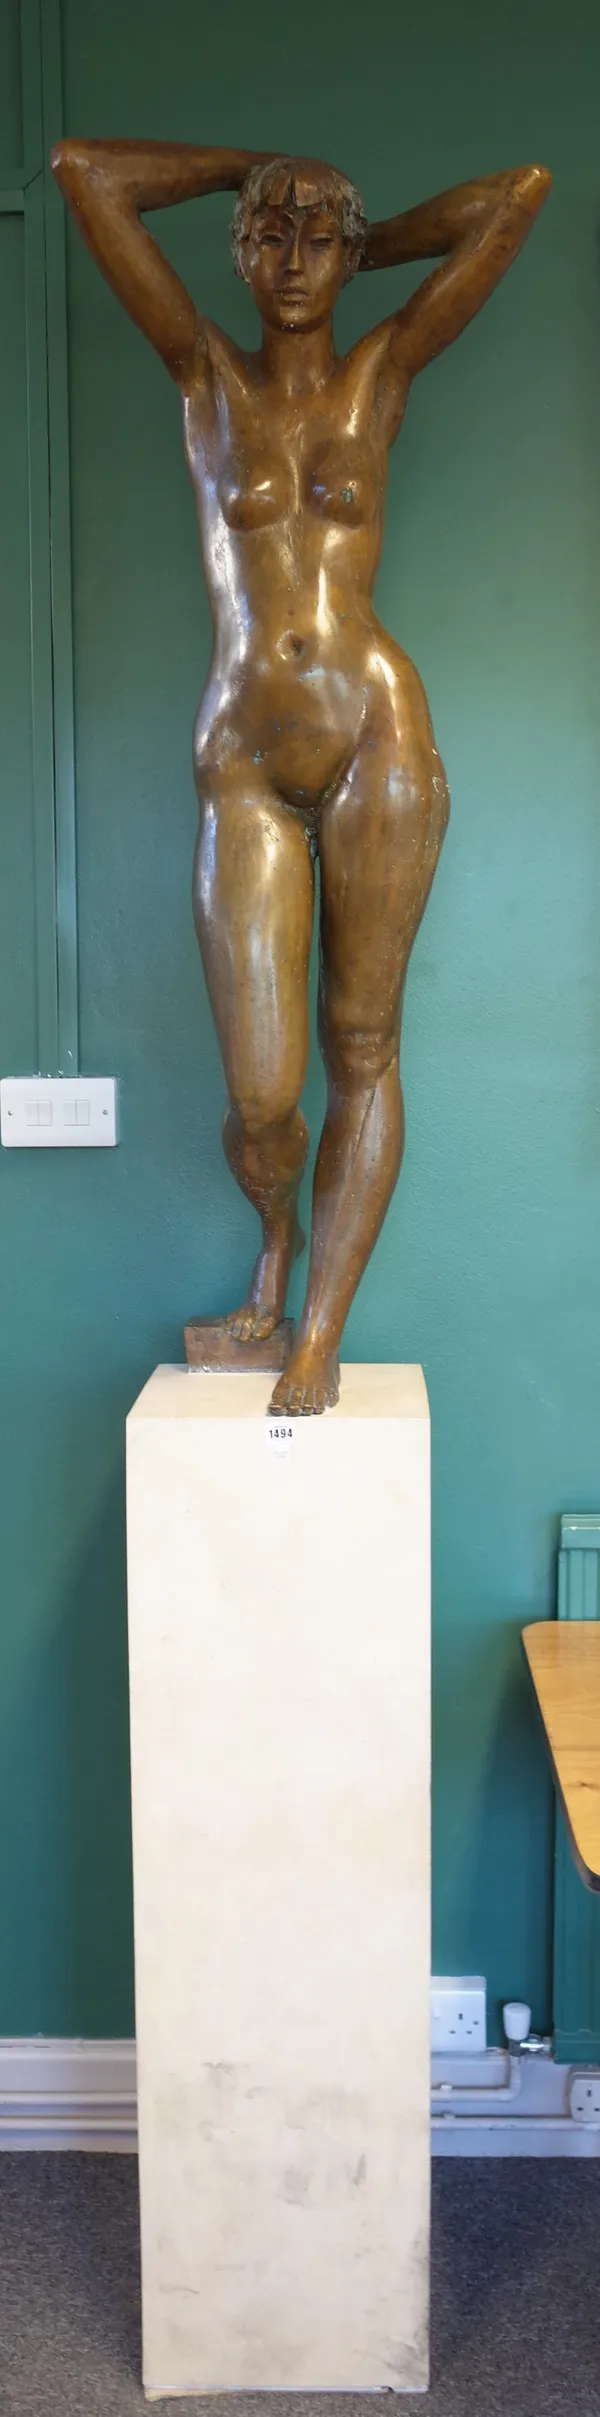 Female nude, late 20th century patinated bronze, arms raised behind head, unsigned, on a marble pedestal, bronze 130cm high, 241cm high overall.